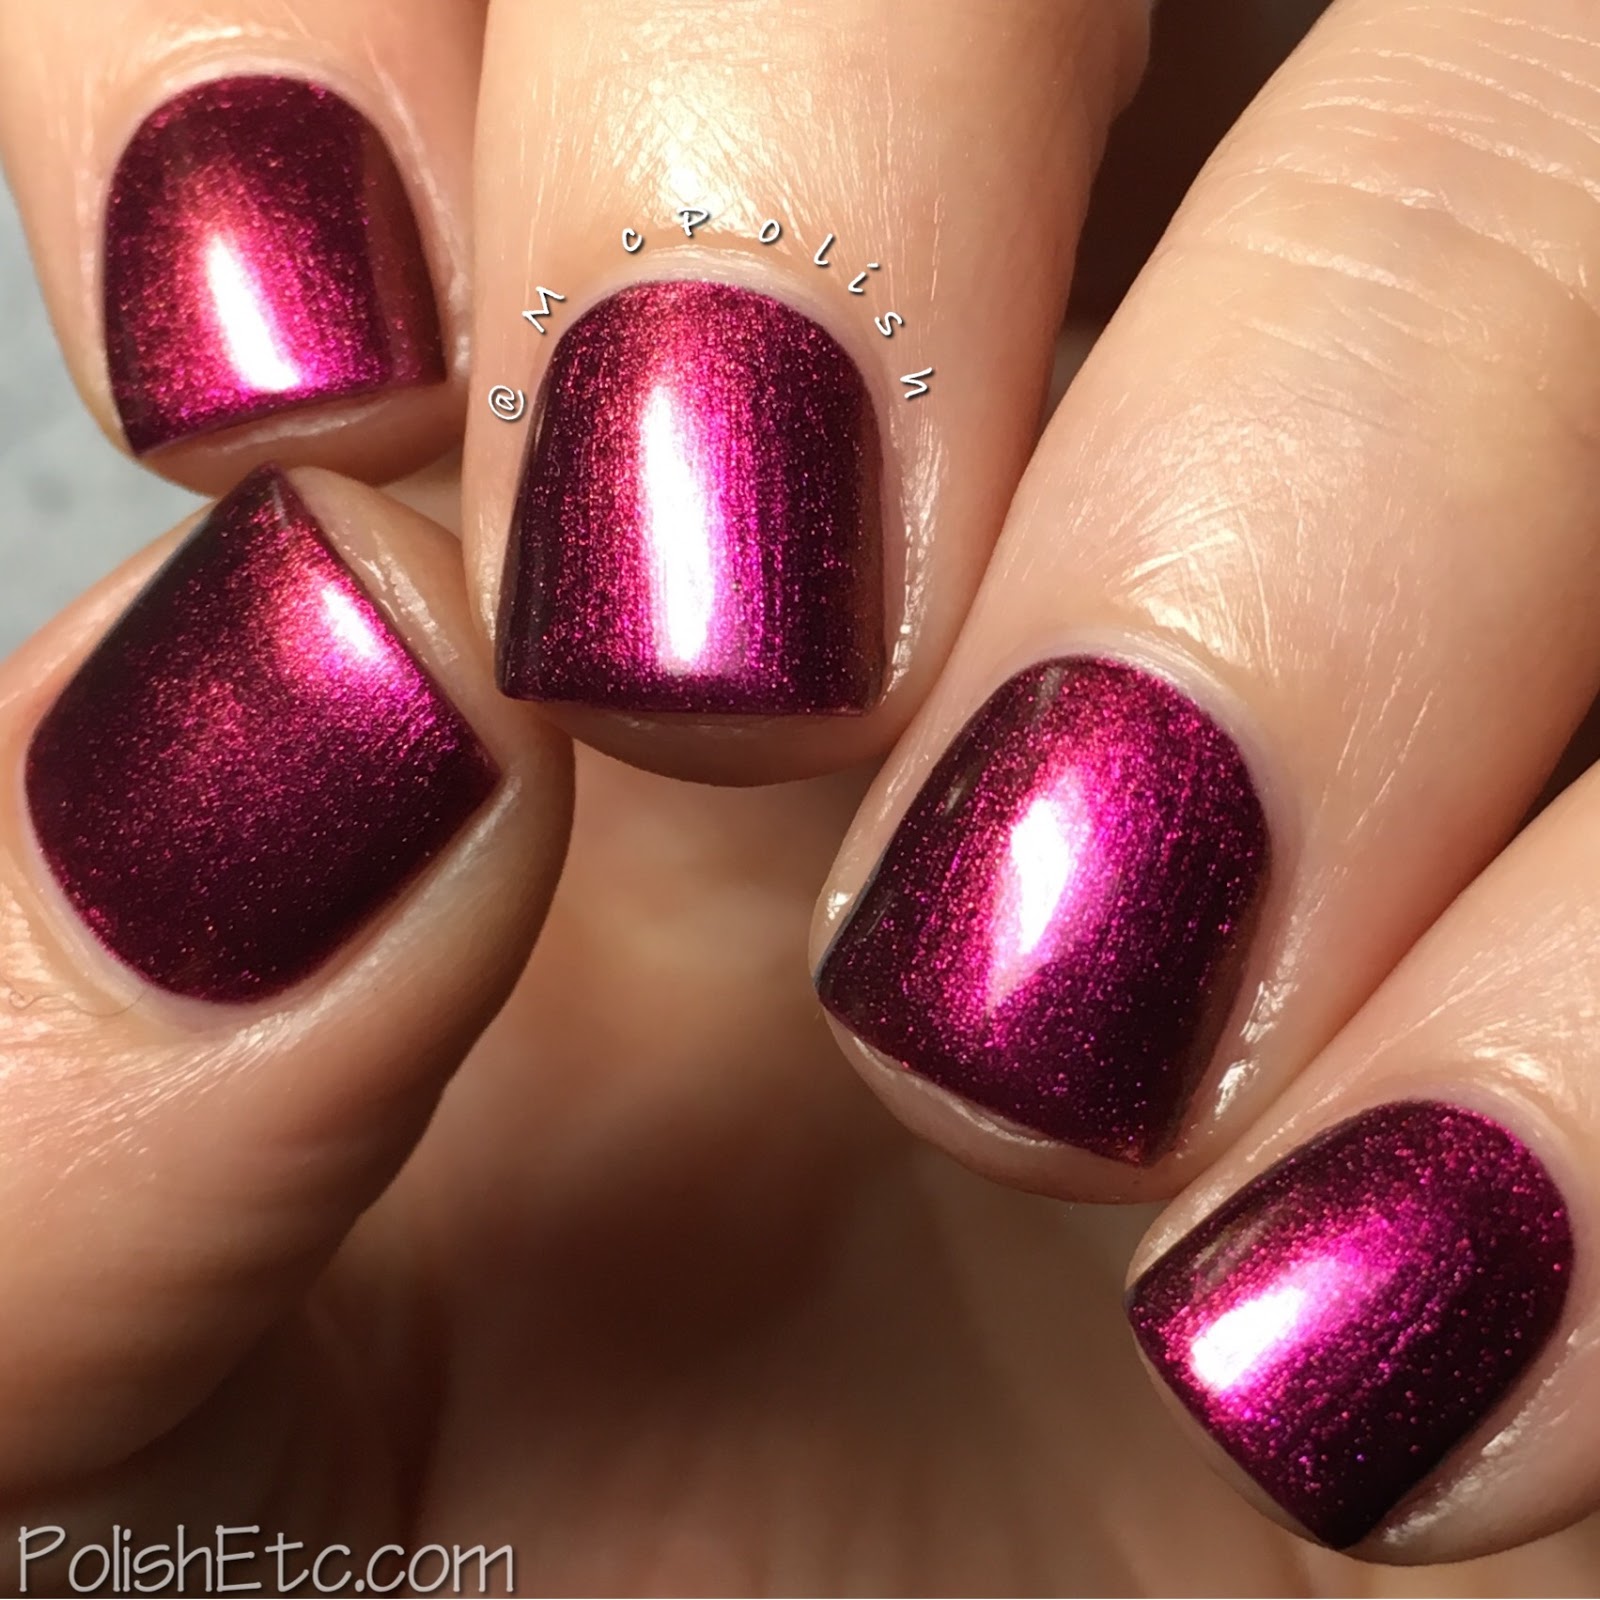 Great Lakes Lacquer - Polishing Poetic Collection - McPolish - A Handful of Dust